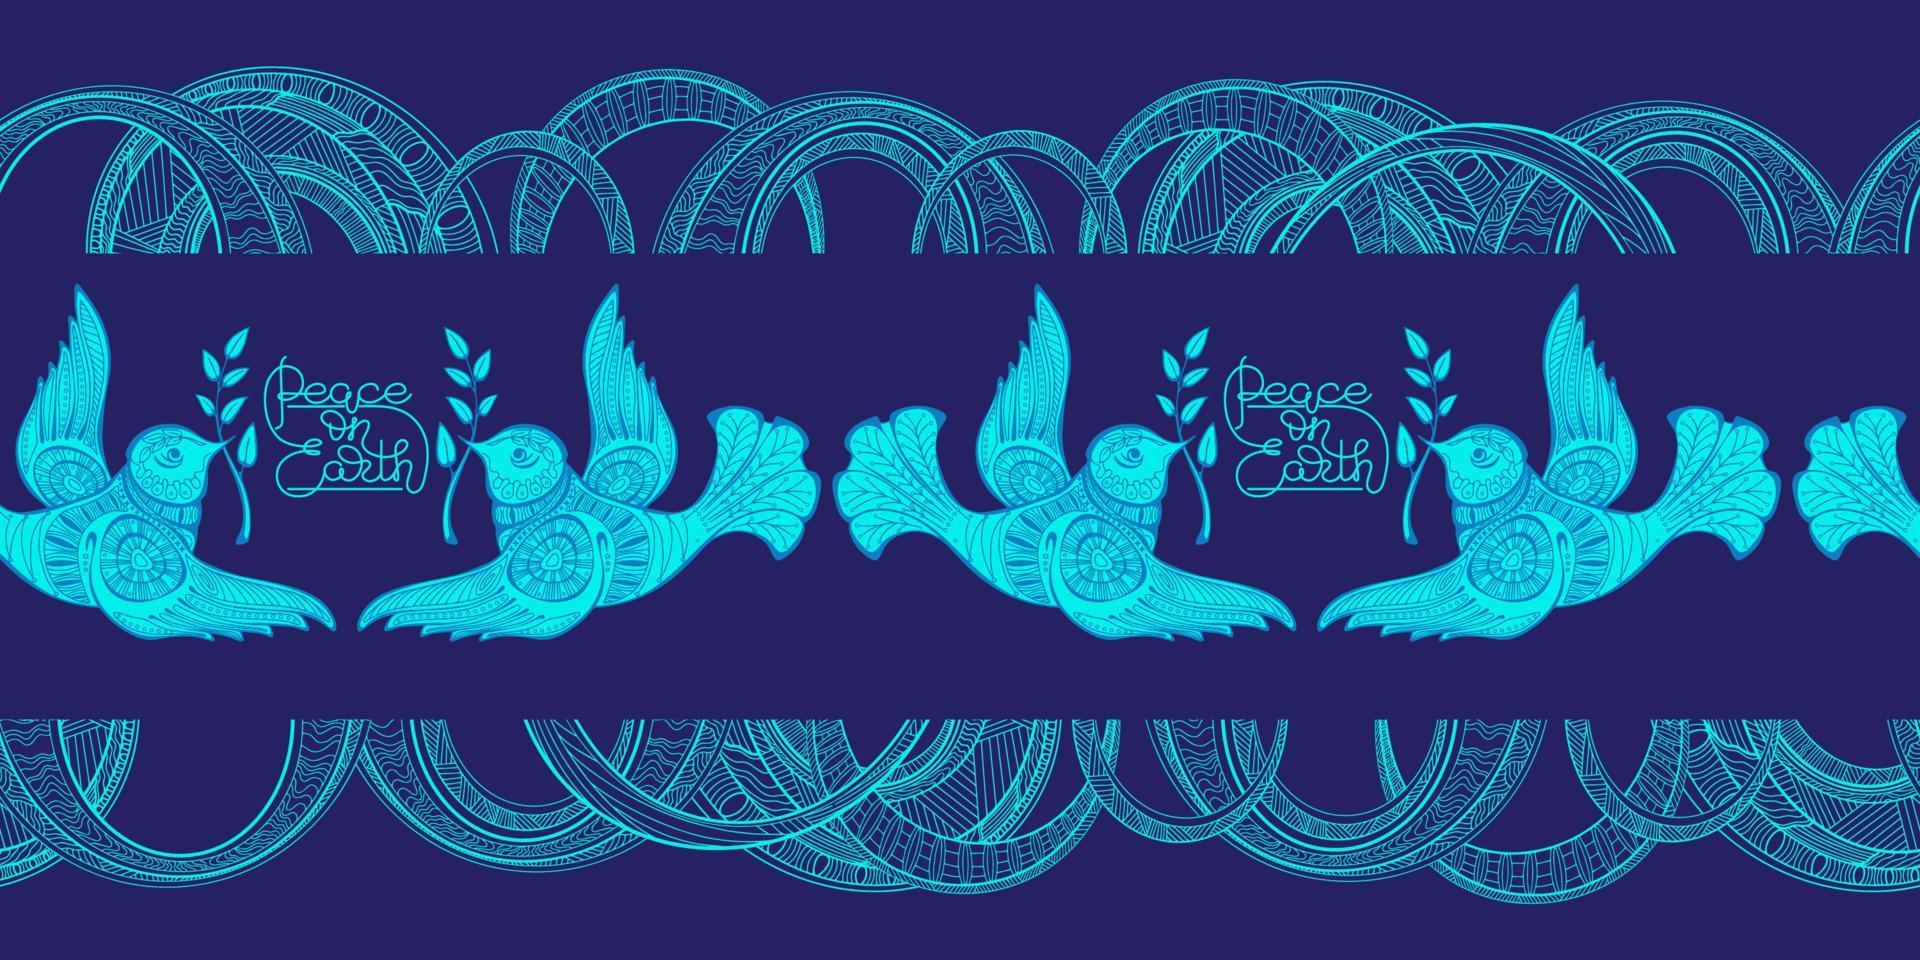 Dove of peace with olive branch. Seamless pattern. Vector illustration.